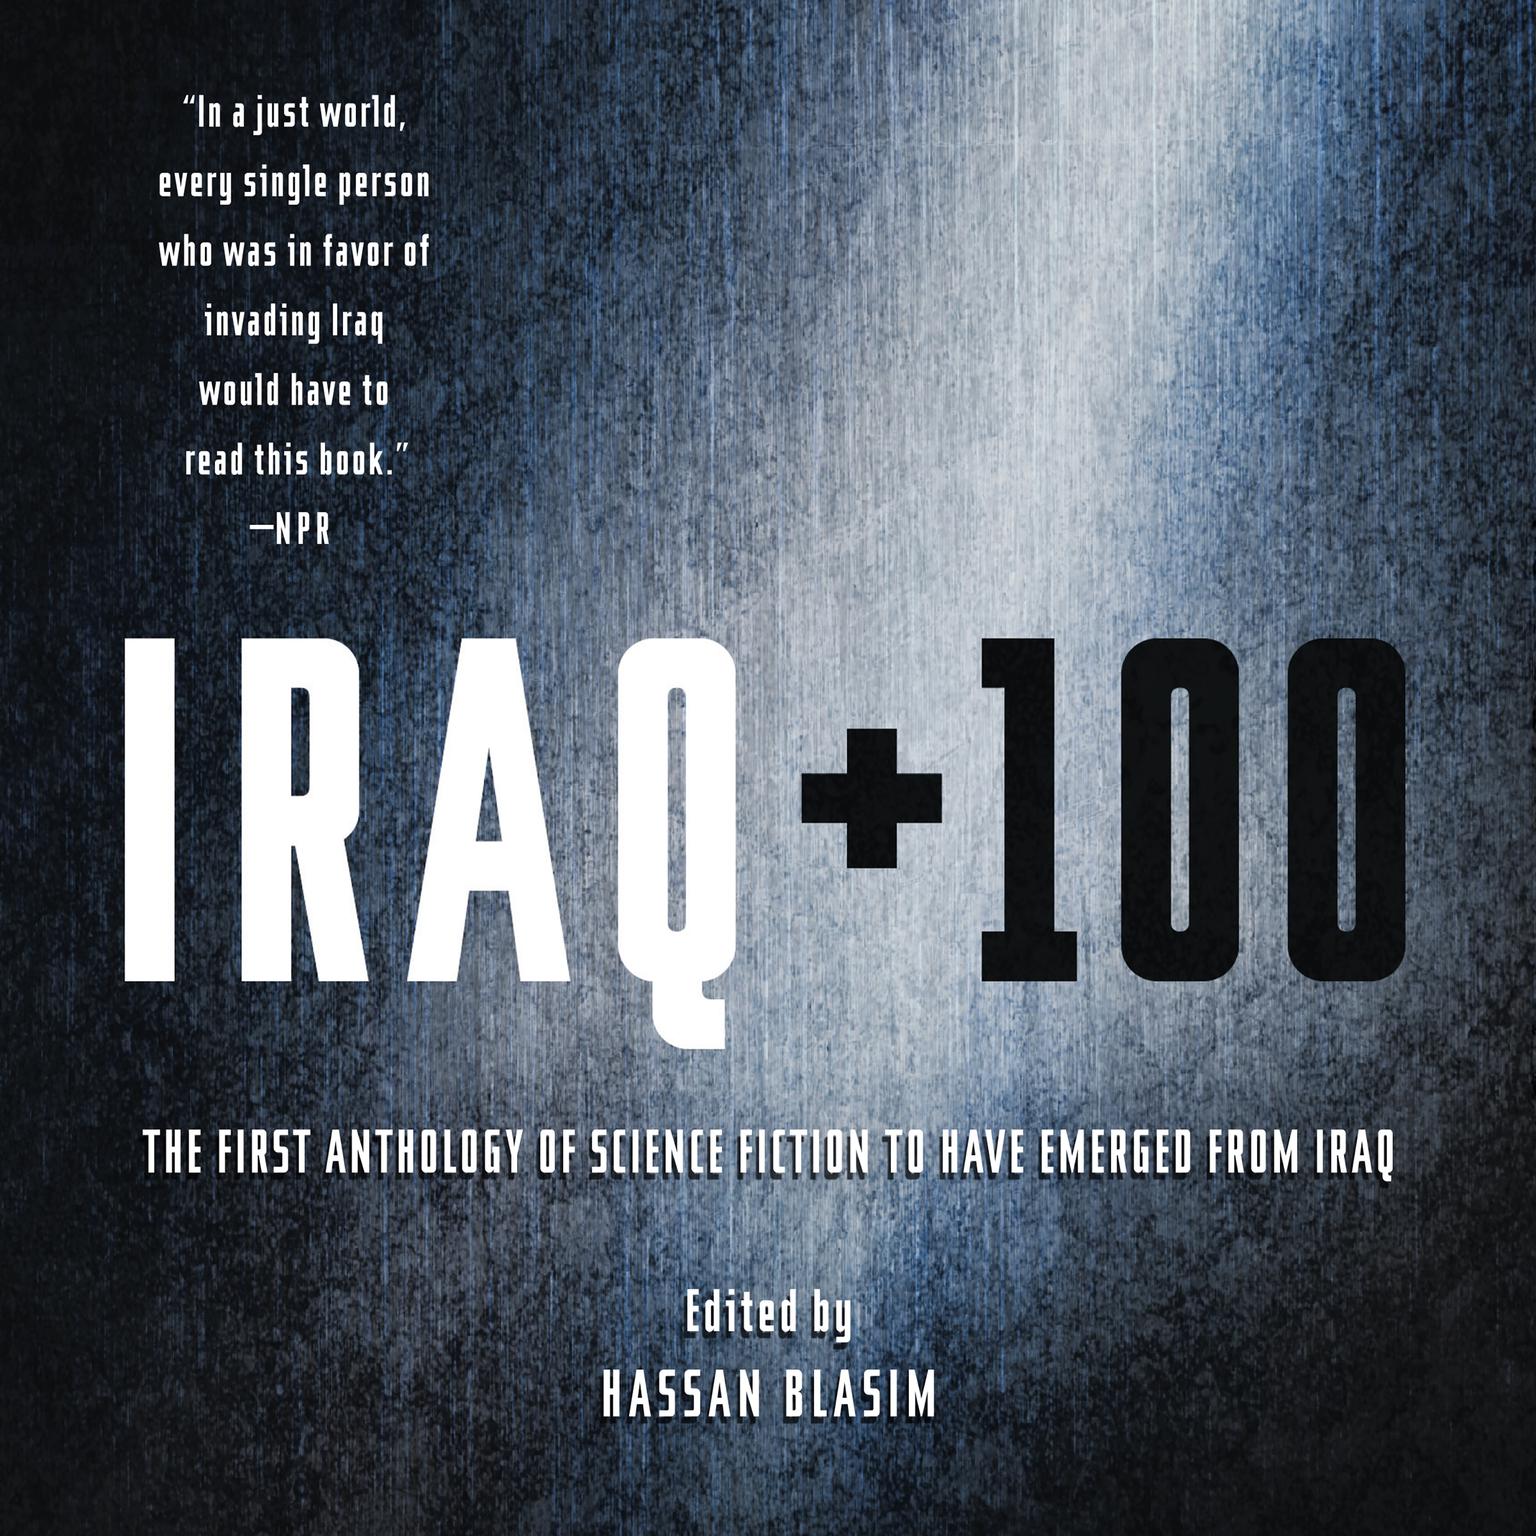 Iraq + 100: The First Anthology of Science Fiction to Have Emerged from Iraq Audiobook, by Hassan Blasim